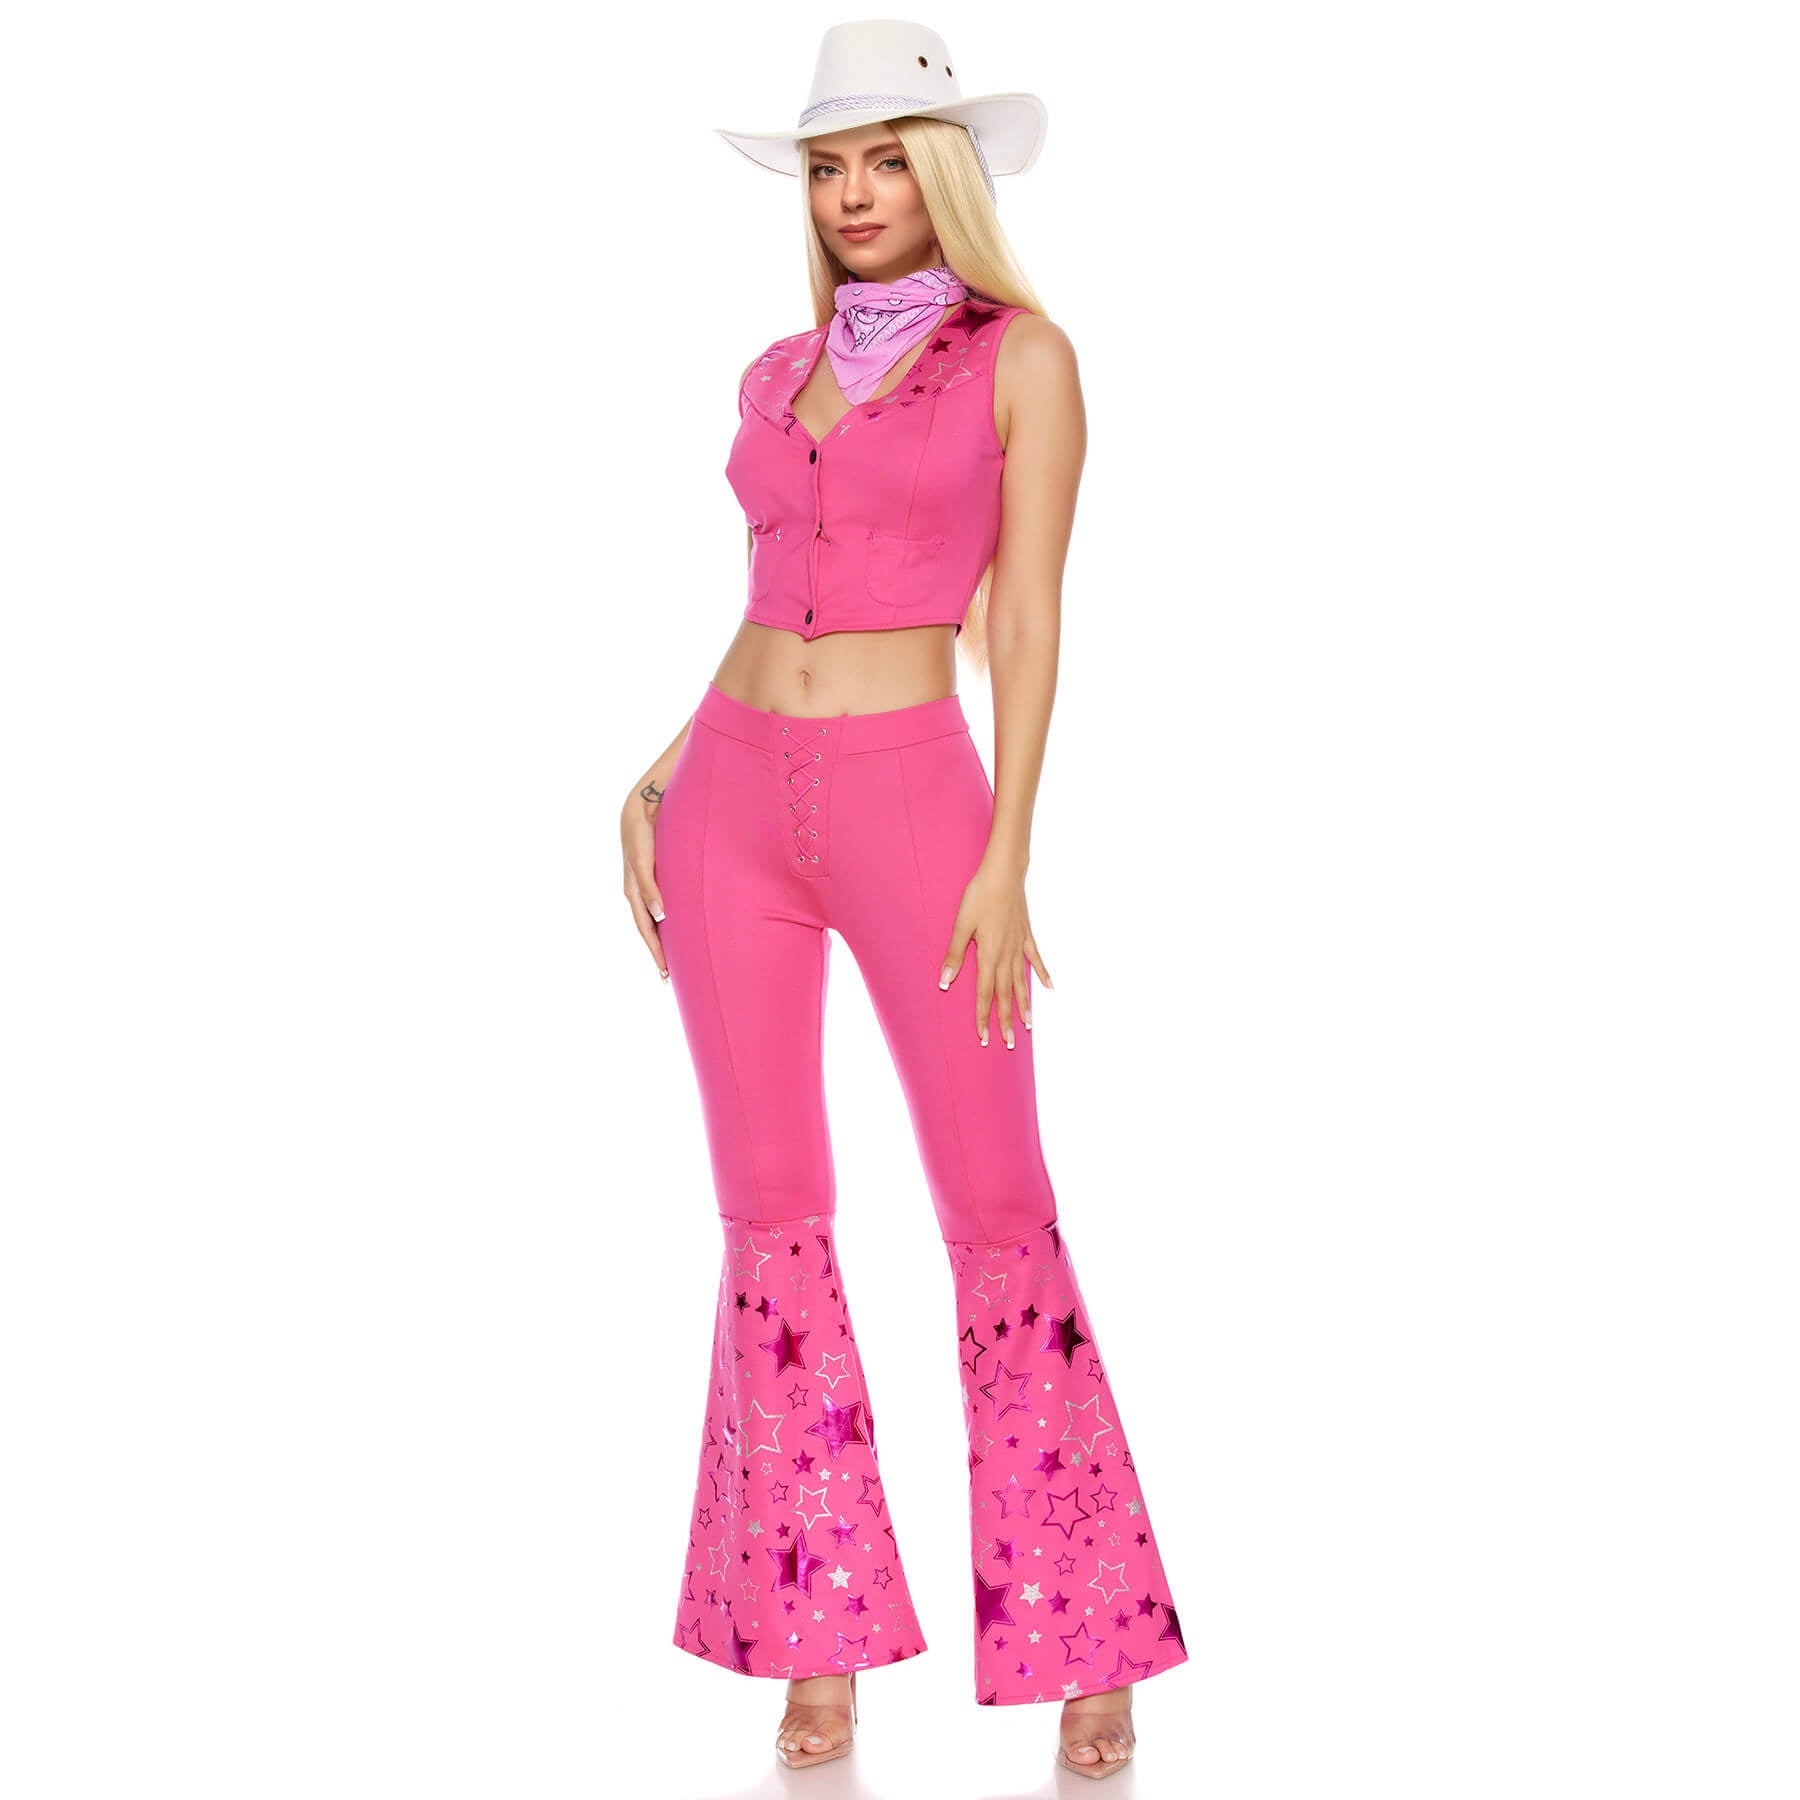 Couples Barbara Costume Cowgirl and Cowboy Outfits Women Men Western Cosplay Costumes